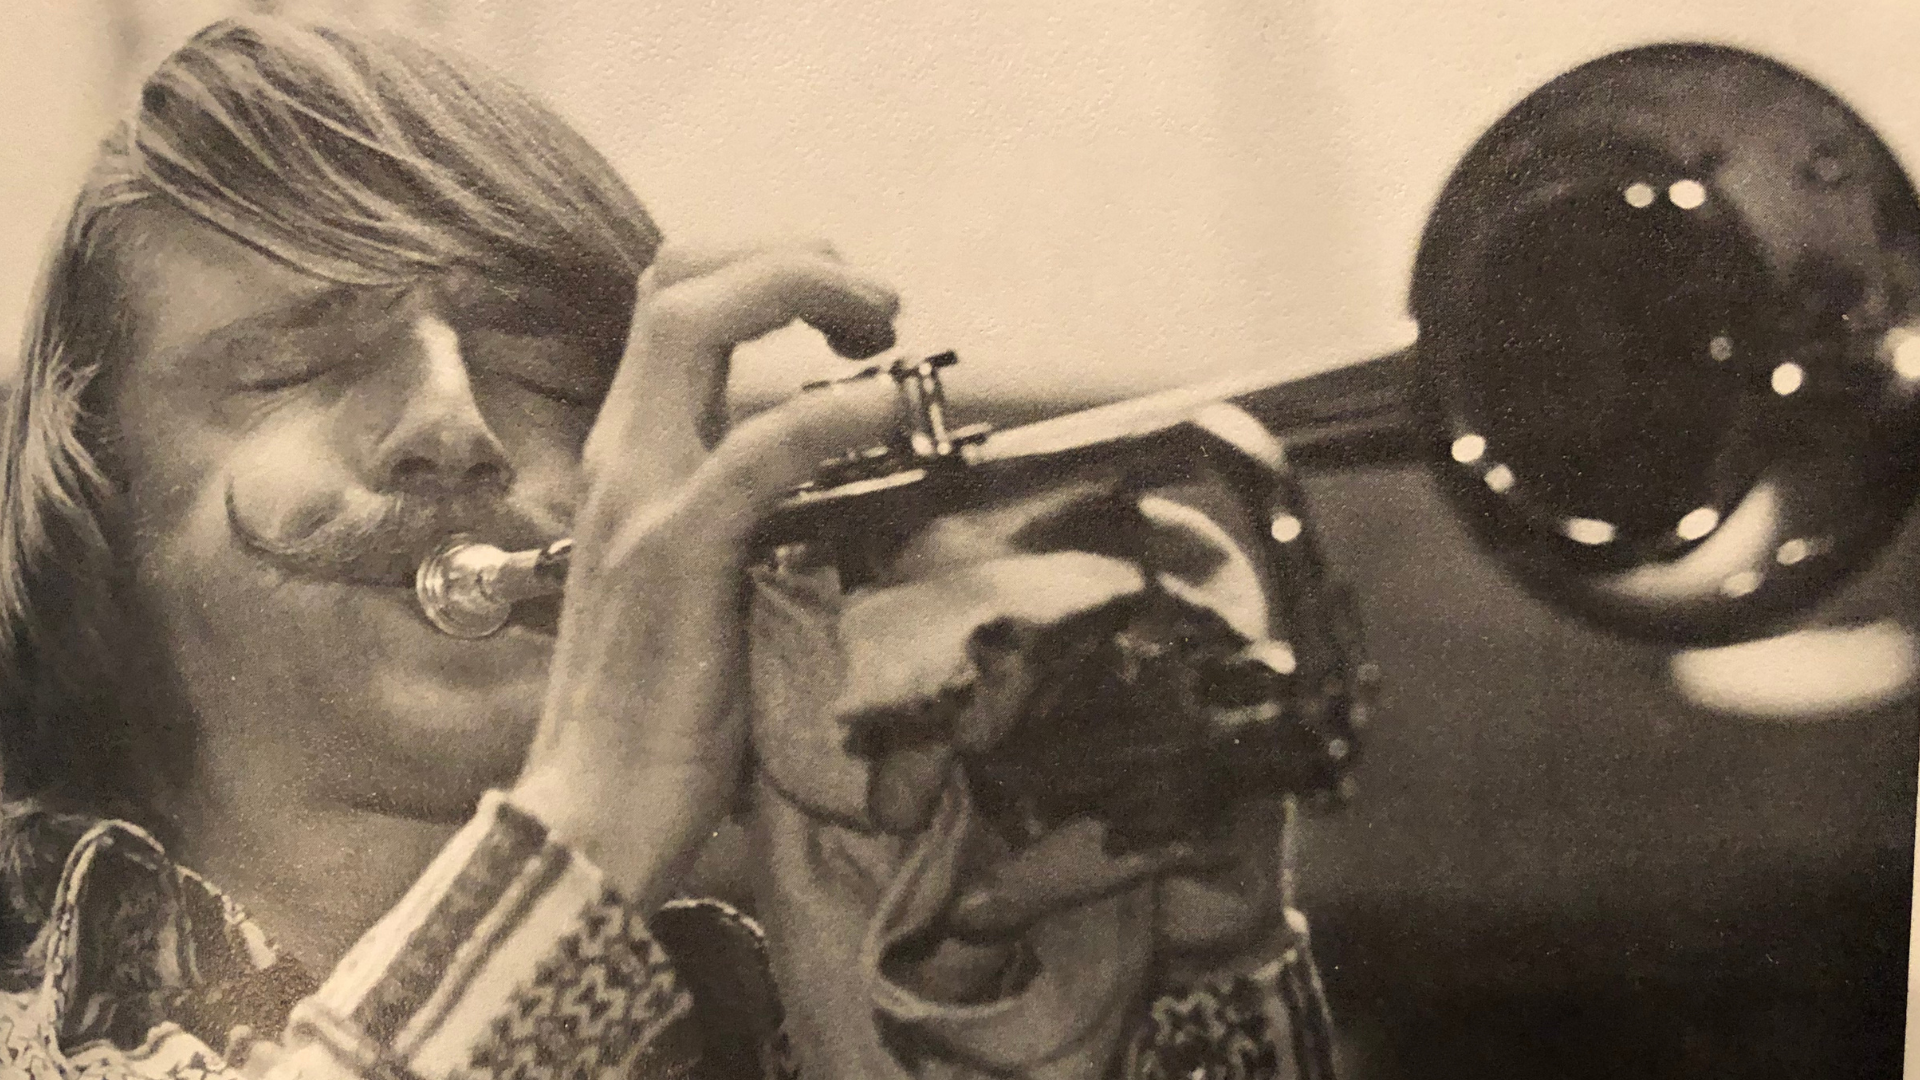 Photograph of a trumpet student from the 1970s.  He is playing the trumpet, eyes closed with a handlebar mustache.